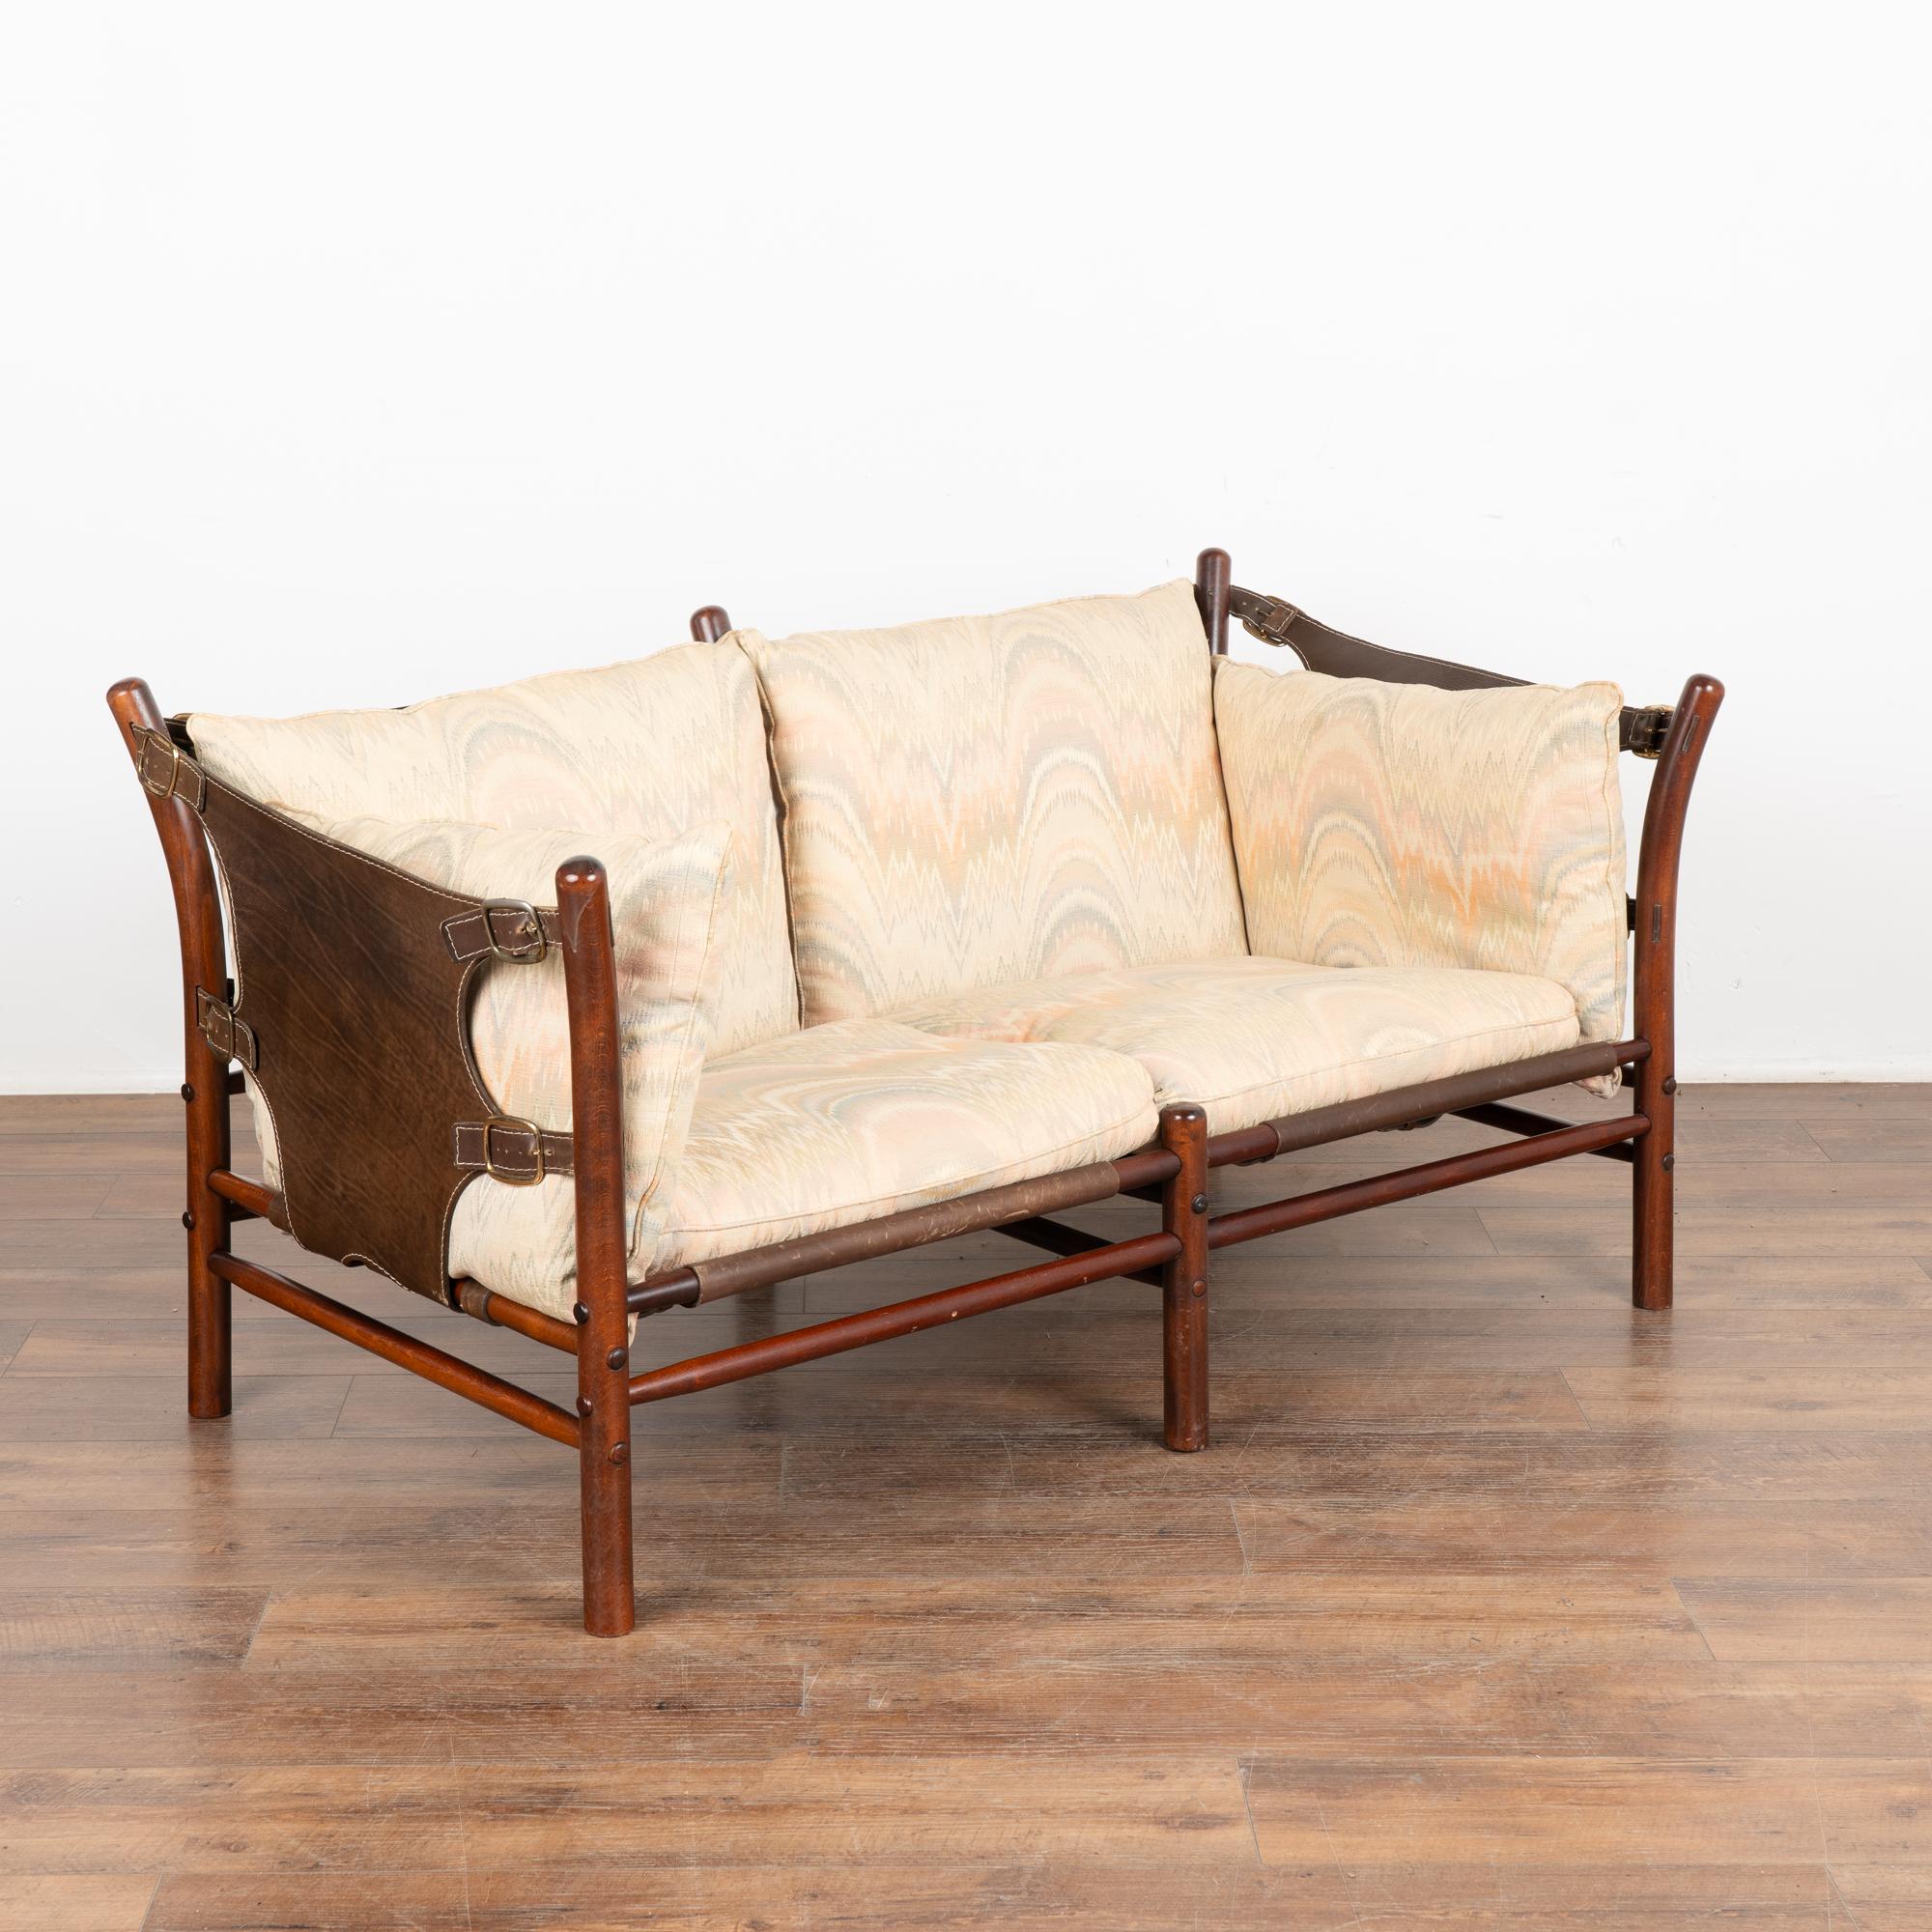 Mid-Century Modern two-person sofa designed by Arne Norell. Leather sling sides and back, brass hardware, loose cushions with zippered covers. The Ilona model was inspired by safari furniture and manufactured by Aneby Møbler (makers mark